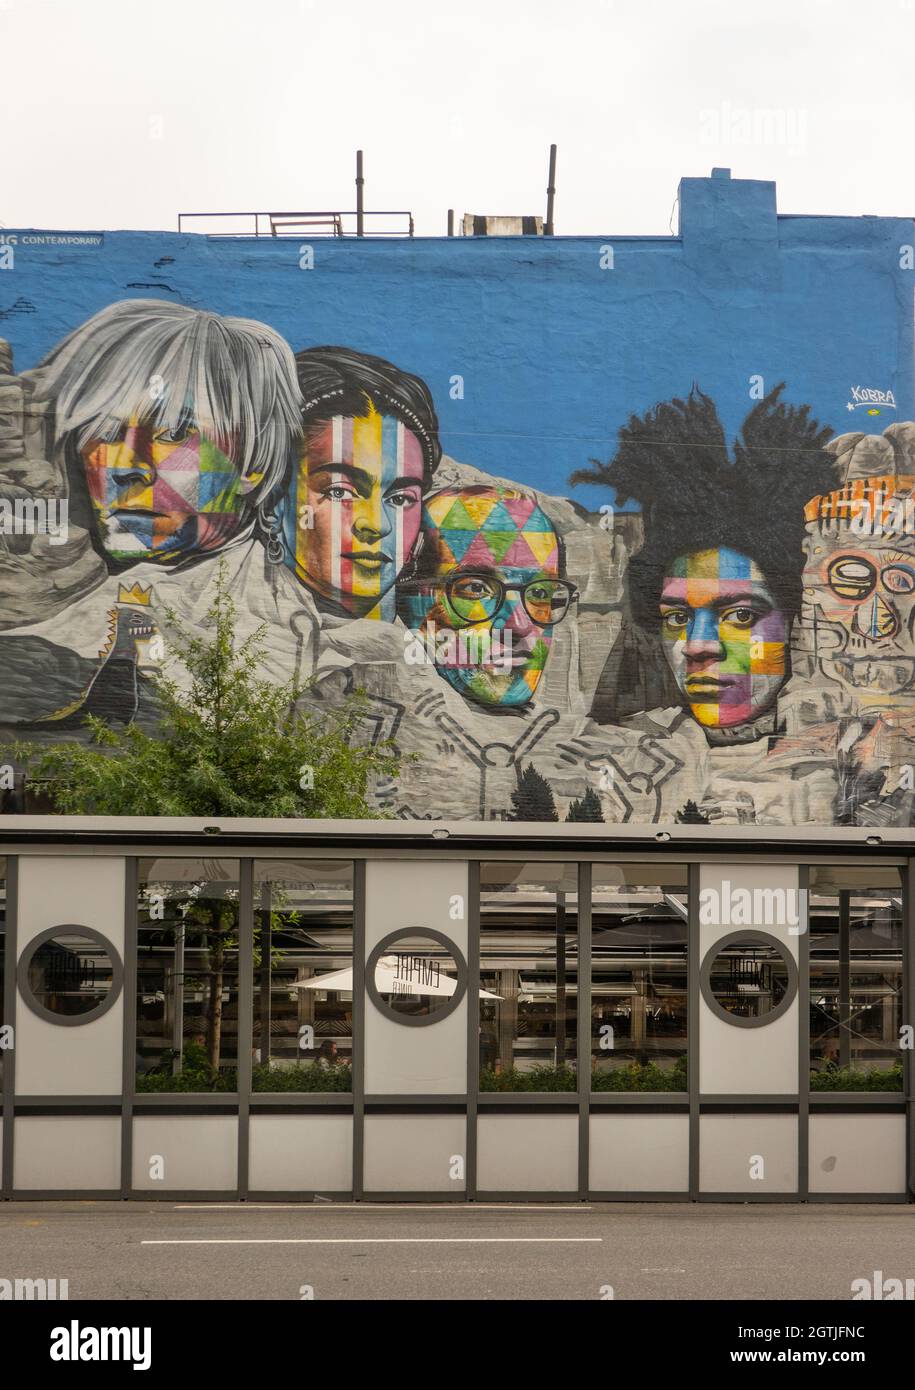 Public wall mural in front of the Empire Diner in Chelsea Manhattan NYC Stock Photo